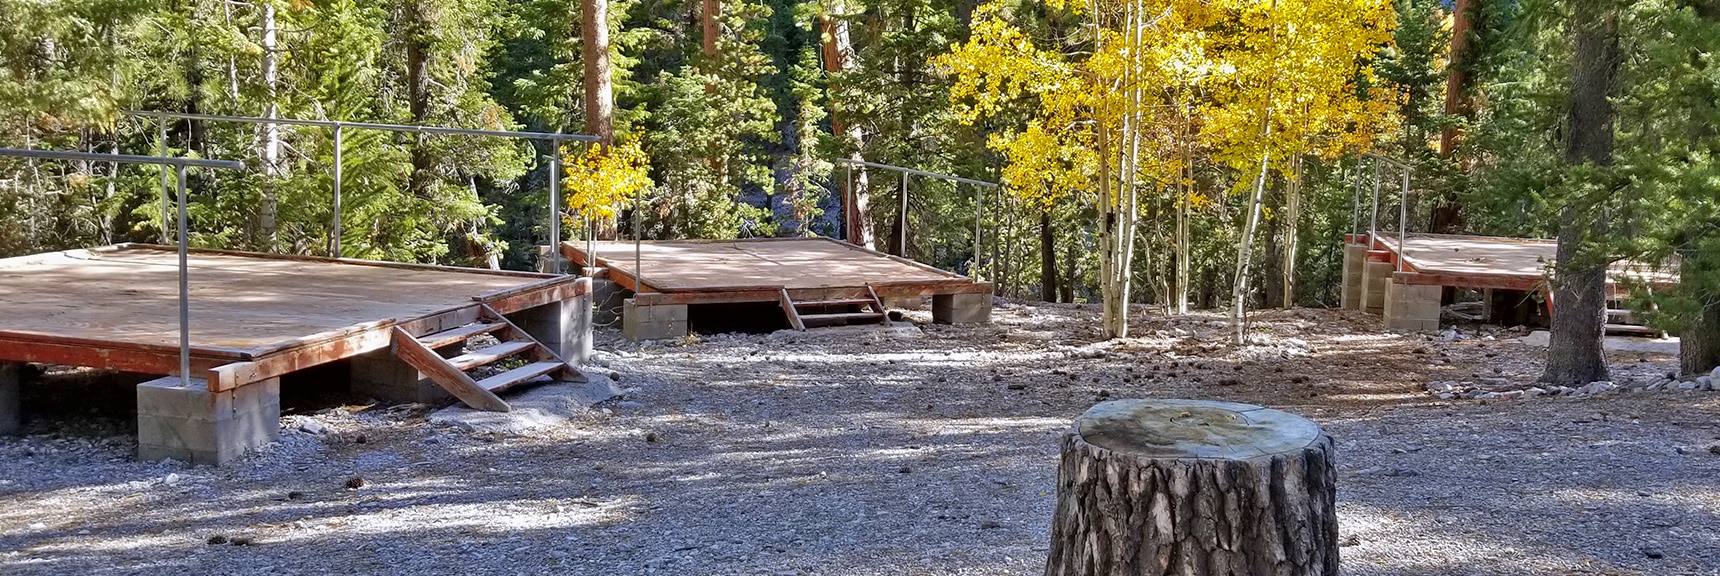 Meeting Platforms at Camp Foxtail Girl Scouts Camp | Foxtail Canyon | Foxtail Girl Scouts Camp | Mt Charleston Wilderness | Spring Mountains, Nevada